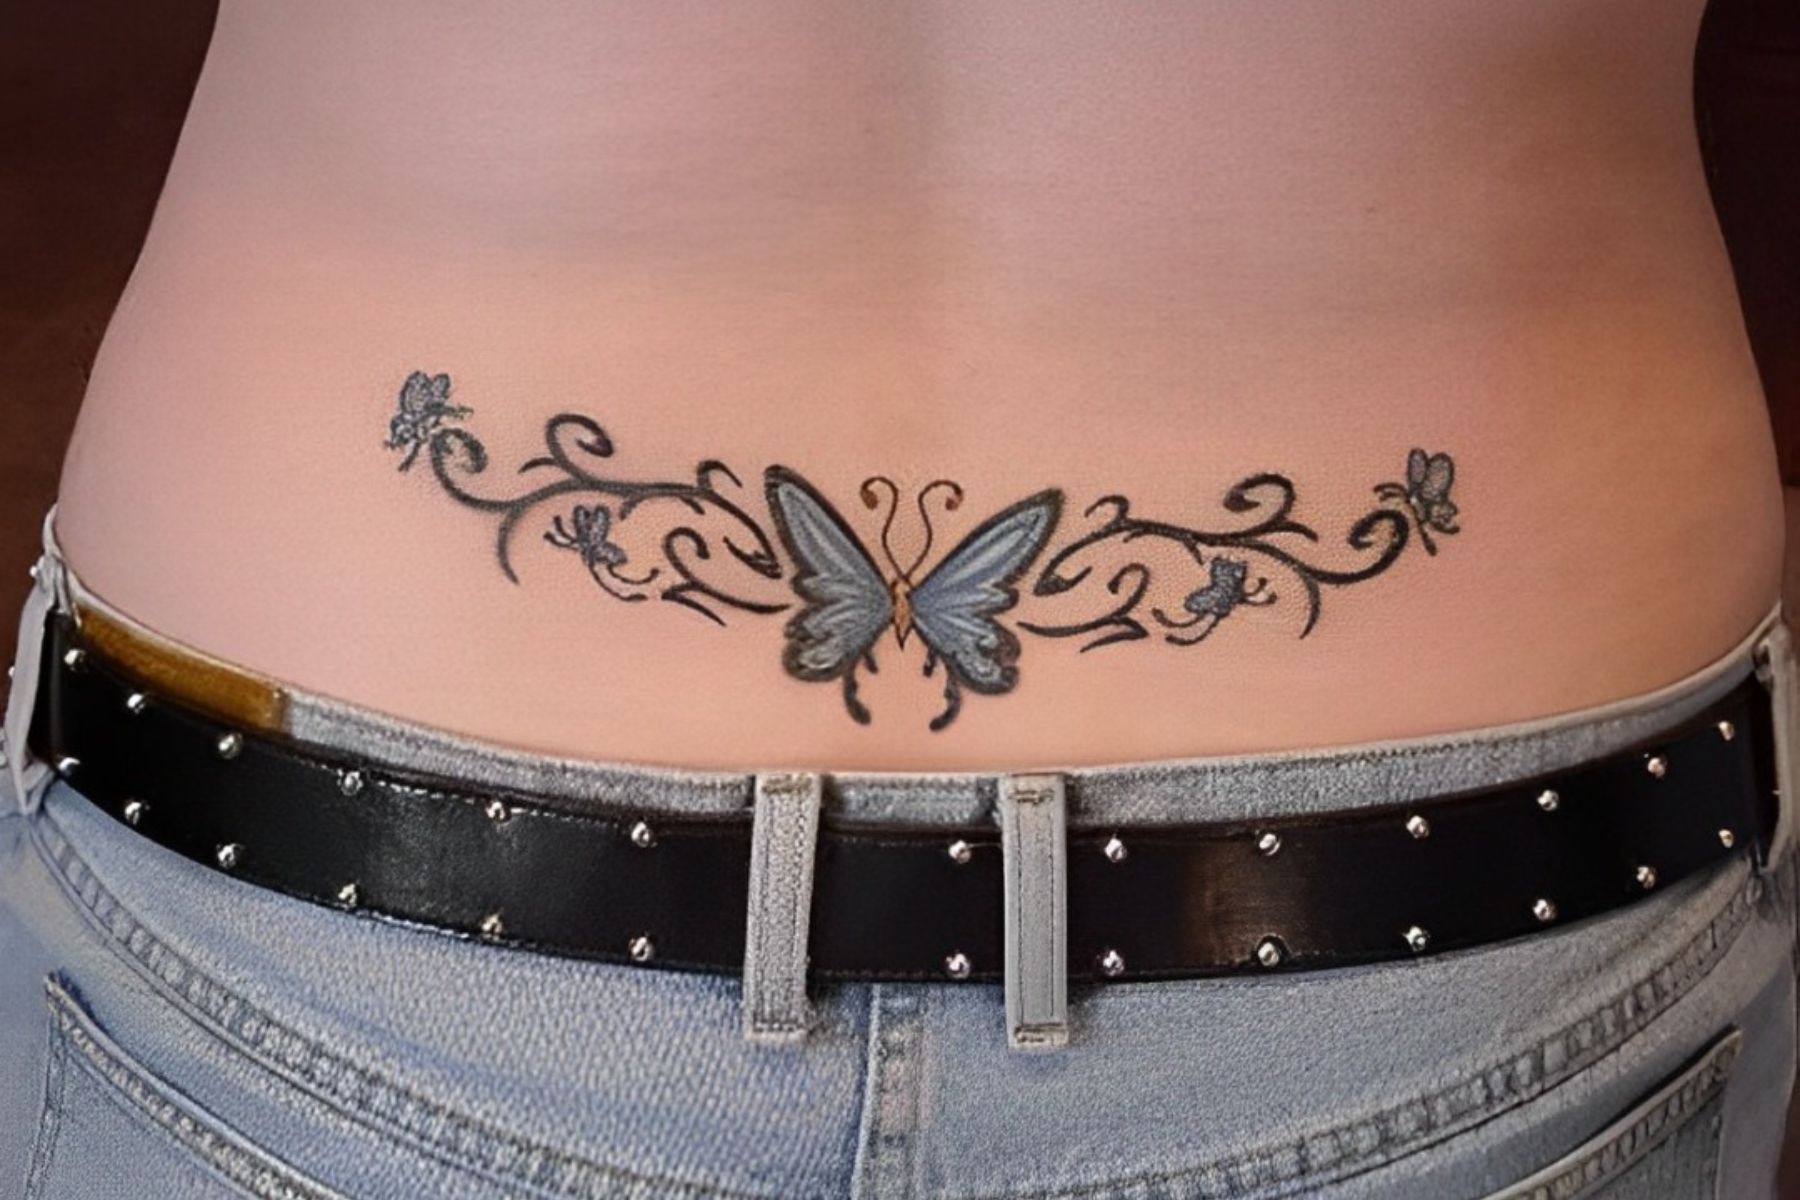 A man has a butterfly tattoo on his lower back